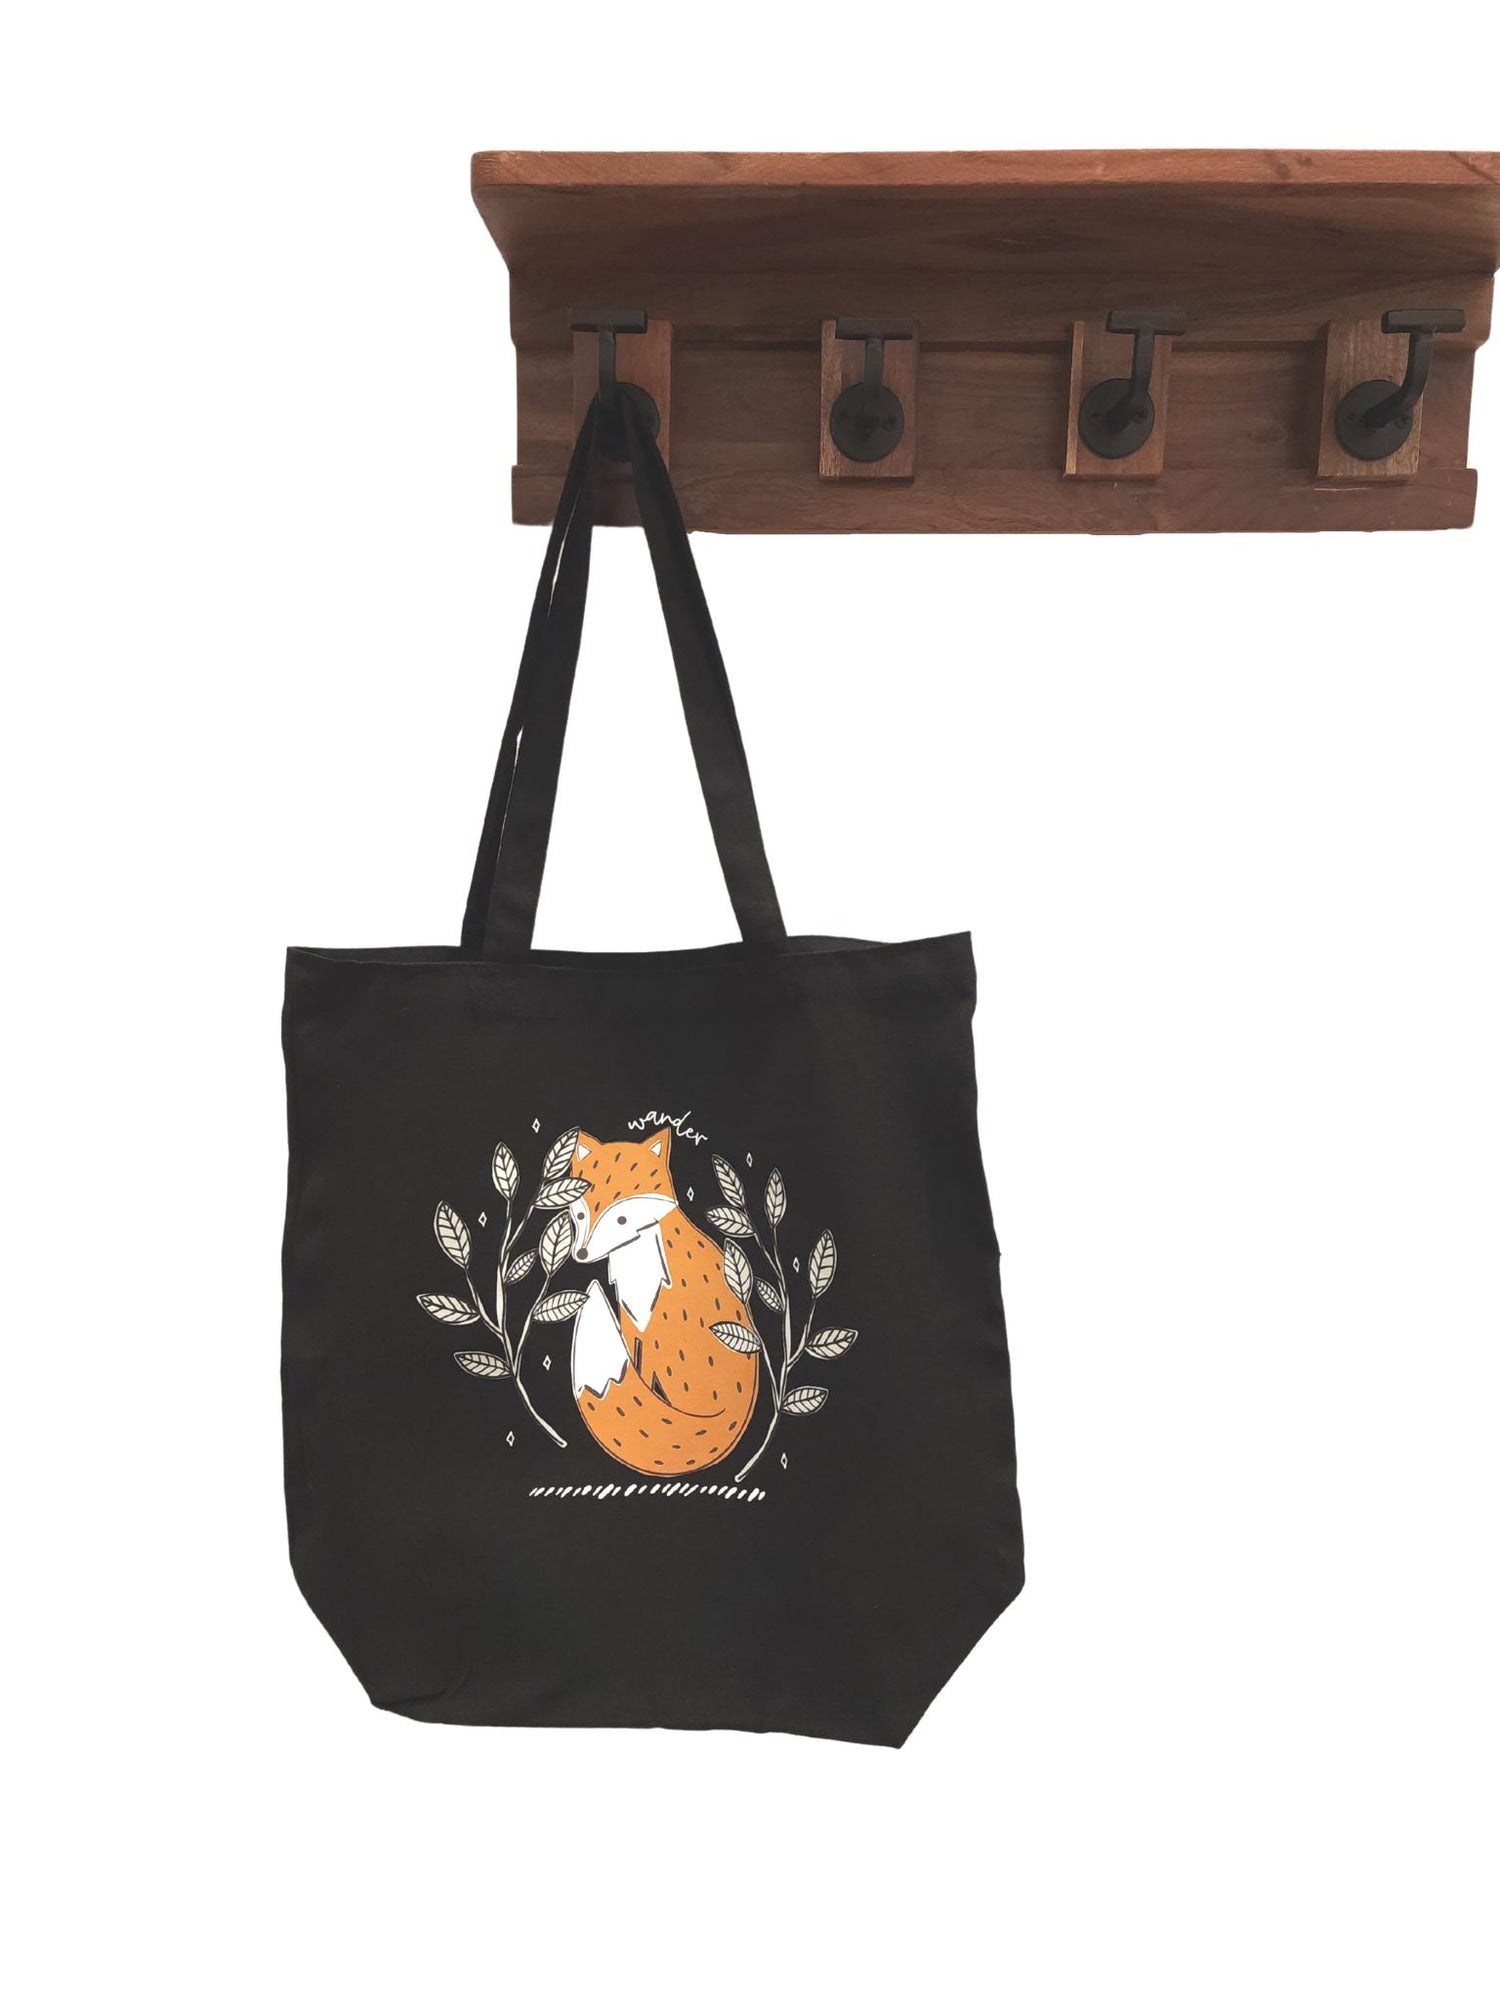 black tote bag with orange fox surrounded by branches and stars with the words wander along the top